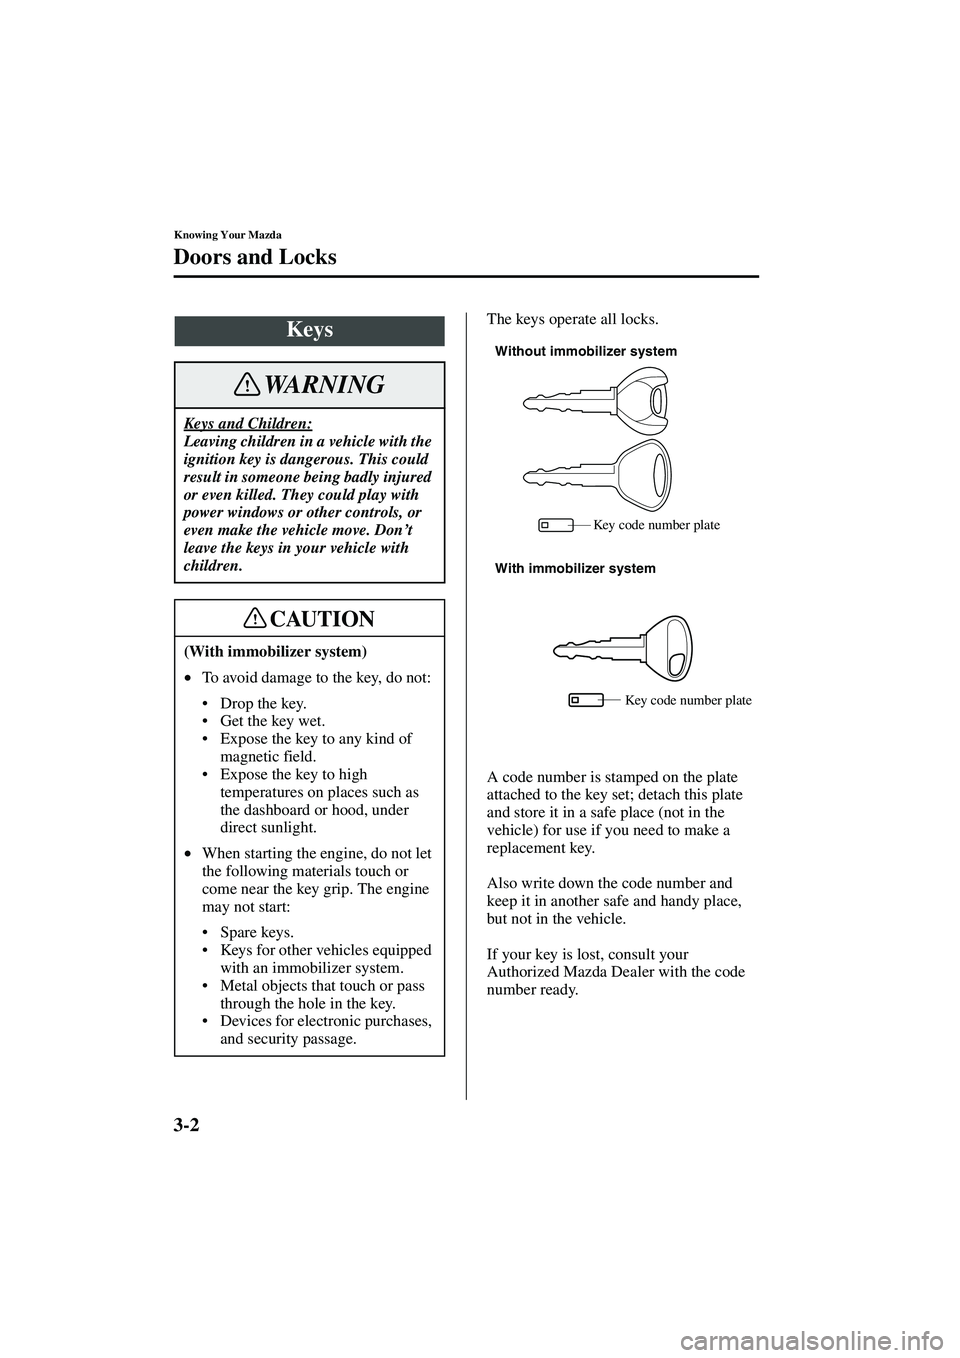 MAZDA MODEL MX-5 MIATA 2003 Owners Guide 3-2
Knowing Your Mazda
Form No. 8R09-EA-02G
Doors and Locks
The keys operate all locks.
A code number is stamped on the plate 
attached to the key set; detach this plate 
and store it in a safe place 